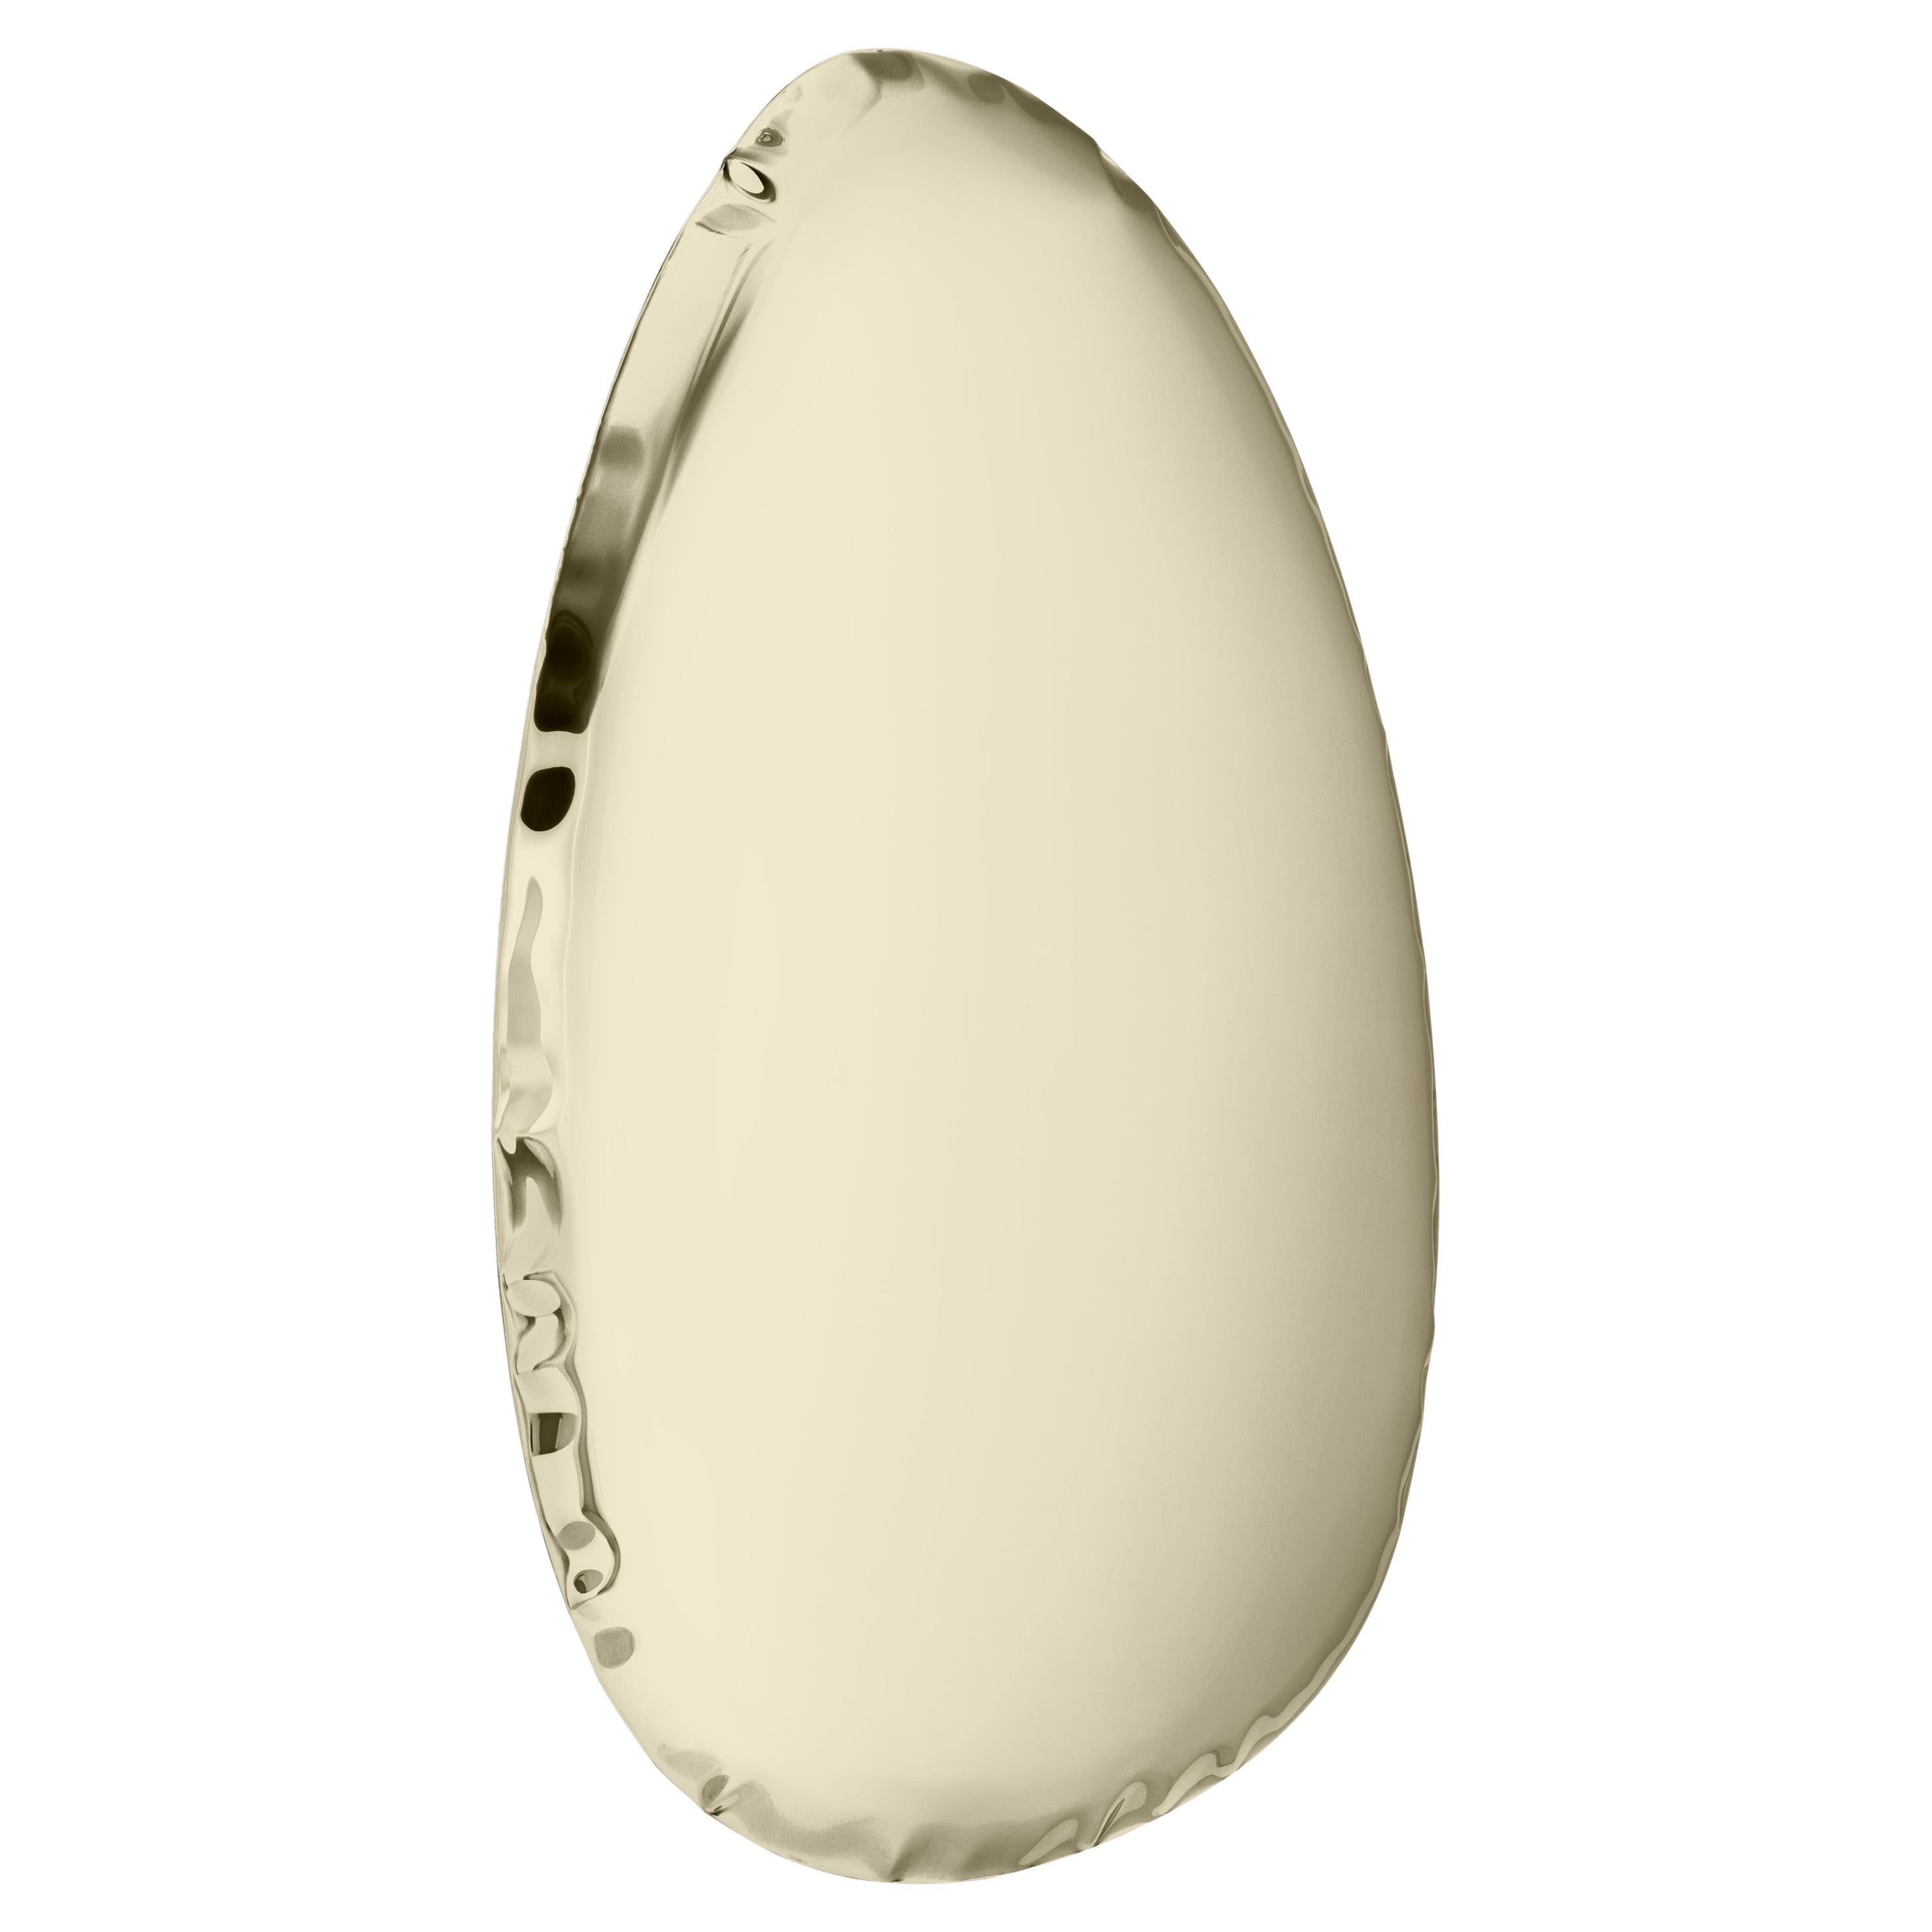 Tafla O4.5 Polished Stainless Steel Light Gold Color Wall Mirror by Zieta For Sale